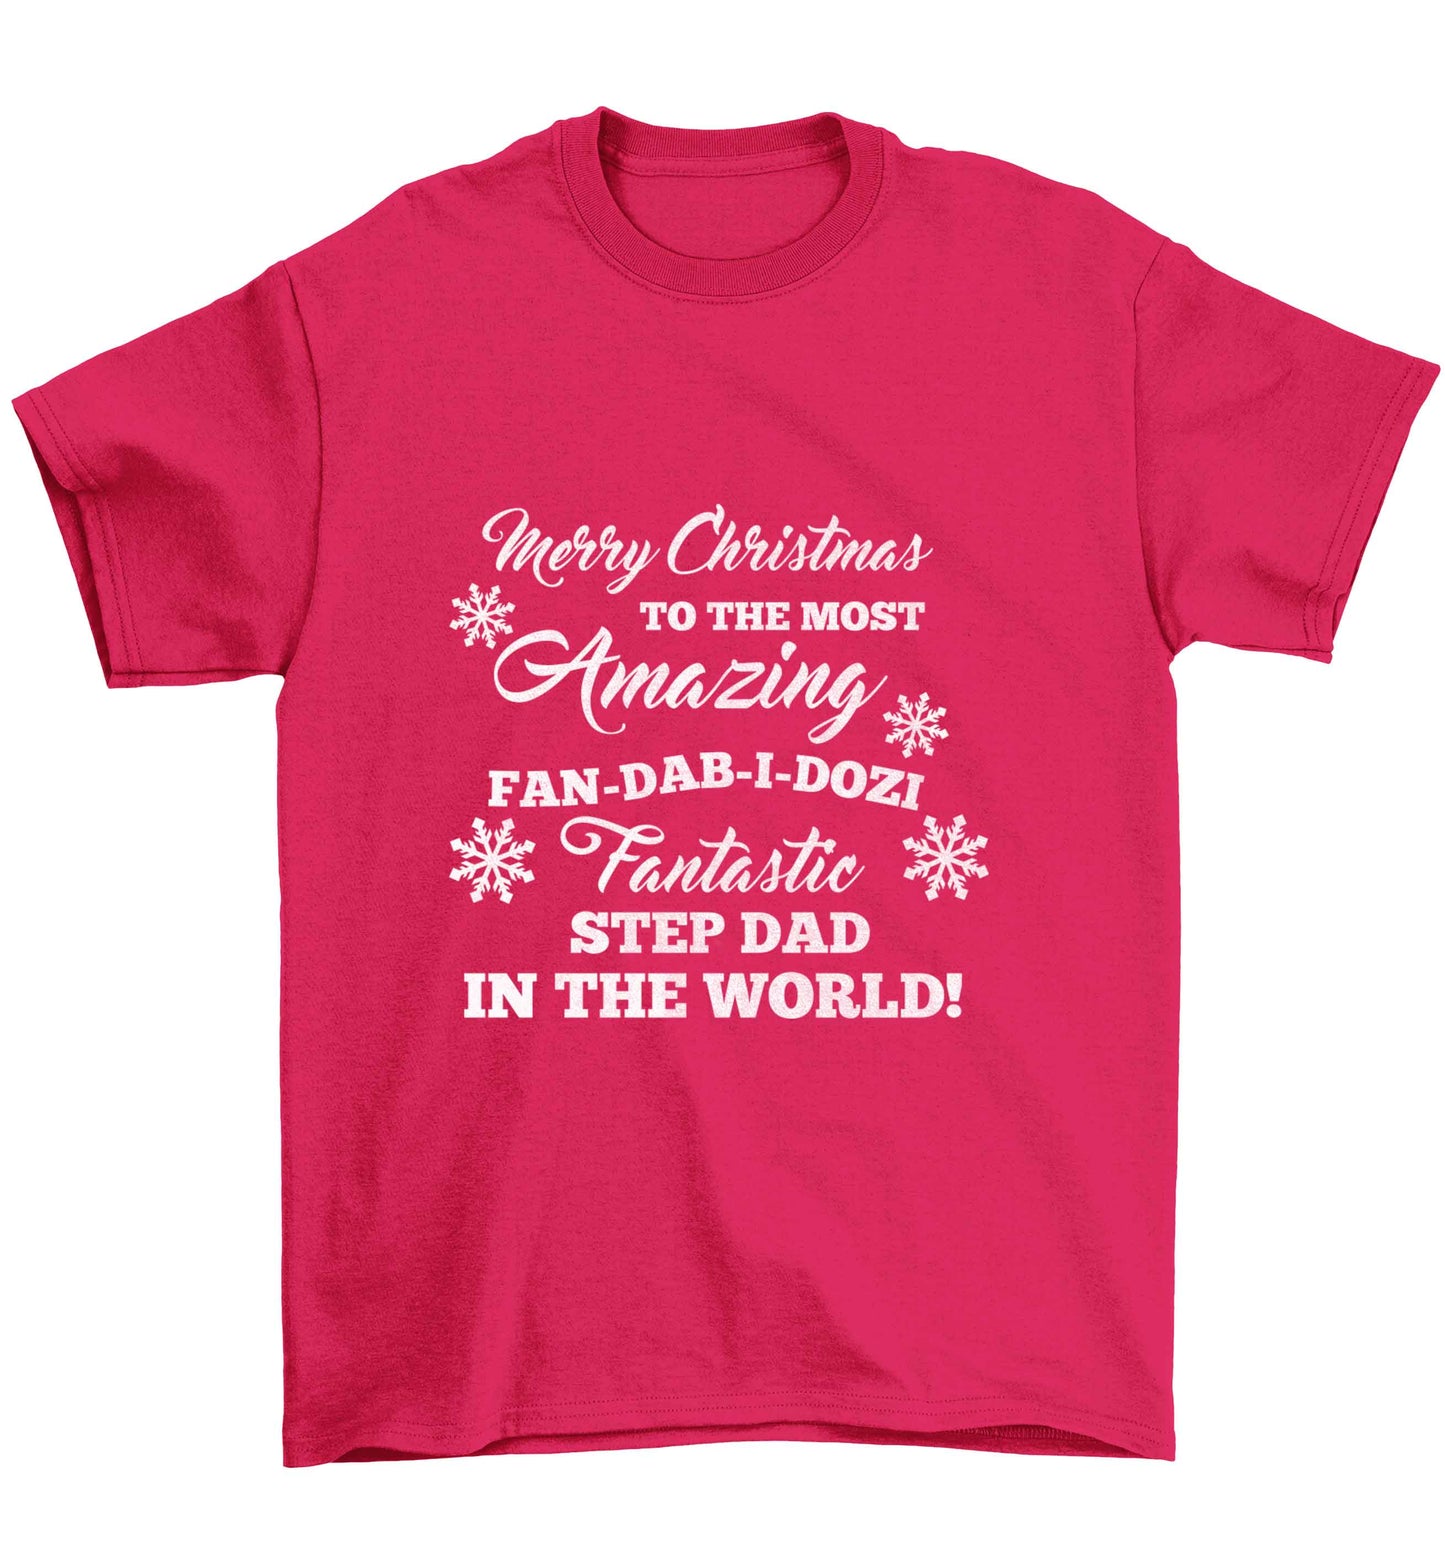 Merry Christmas to the most amazing fan-dab-i-dozi fantasic Step Dad in the world Children's pink Tshirt 12-13 Years